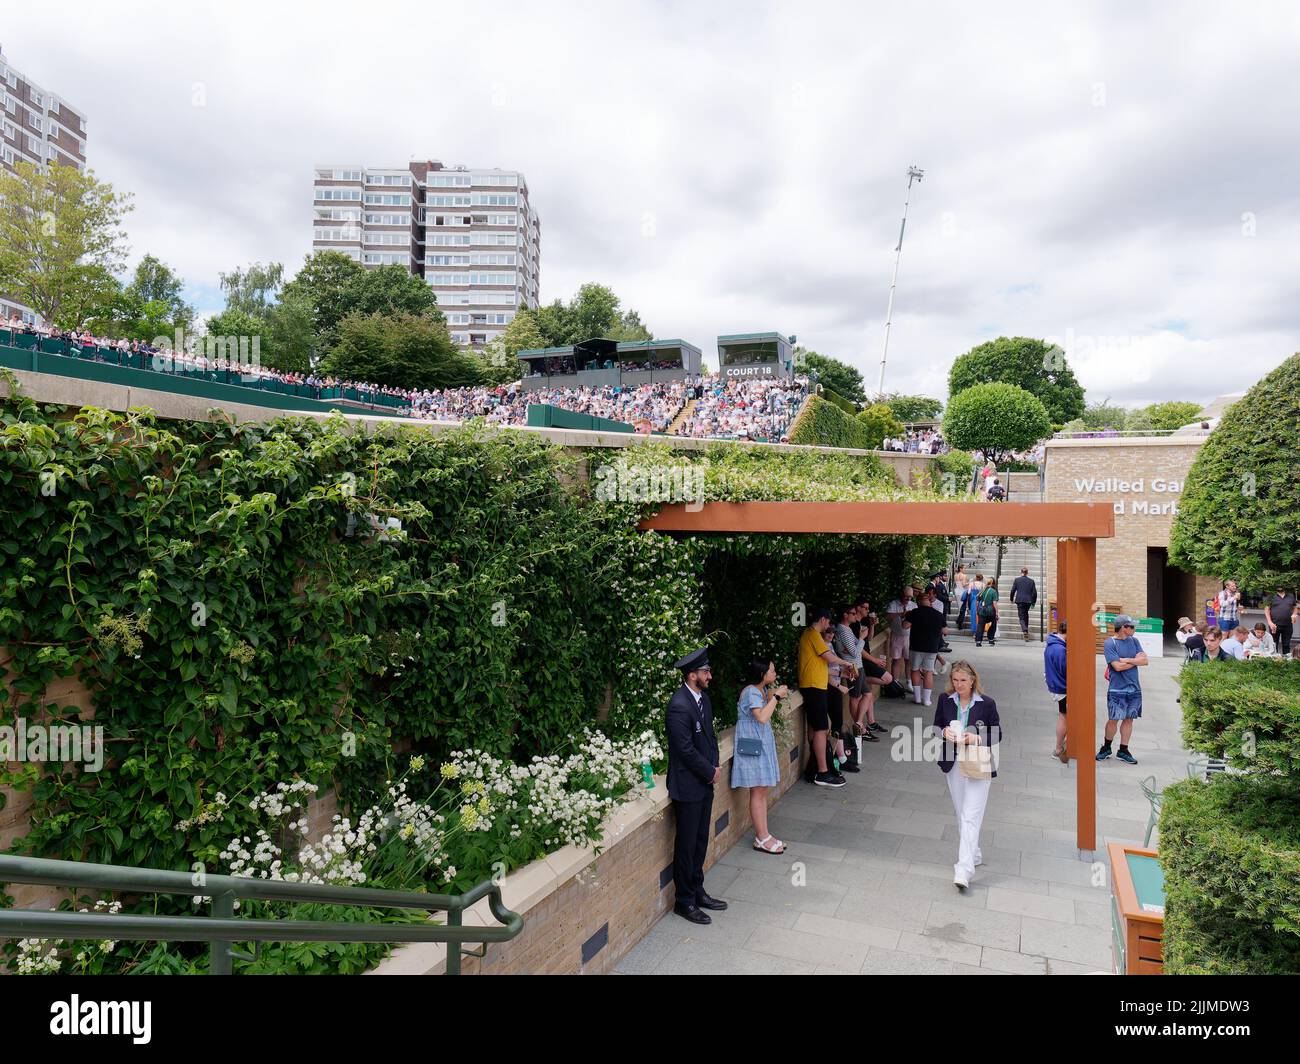 Wimbledon, Greater London, England, July 02 2022: Wimbledon Tennis Championship. Outside court full of spectators and a nearby block of flats. People Stock Photo